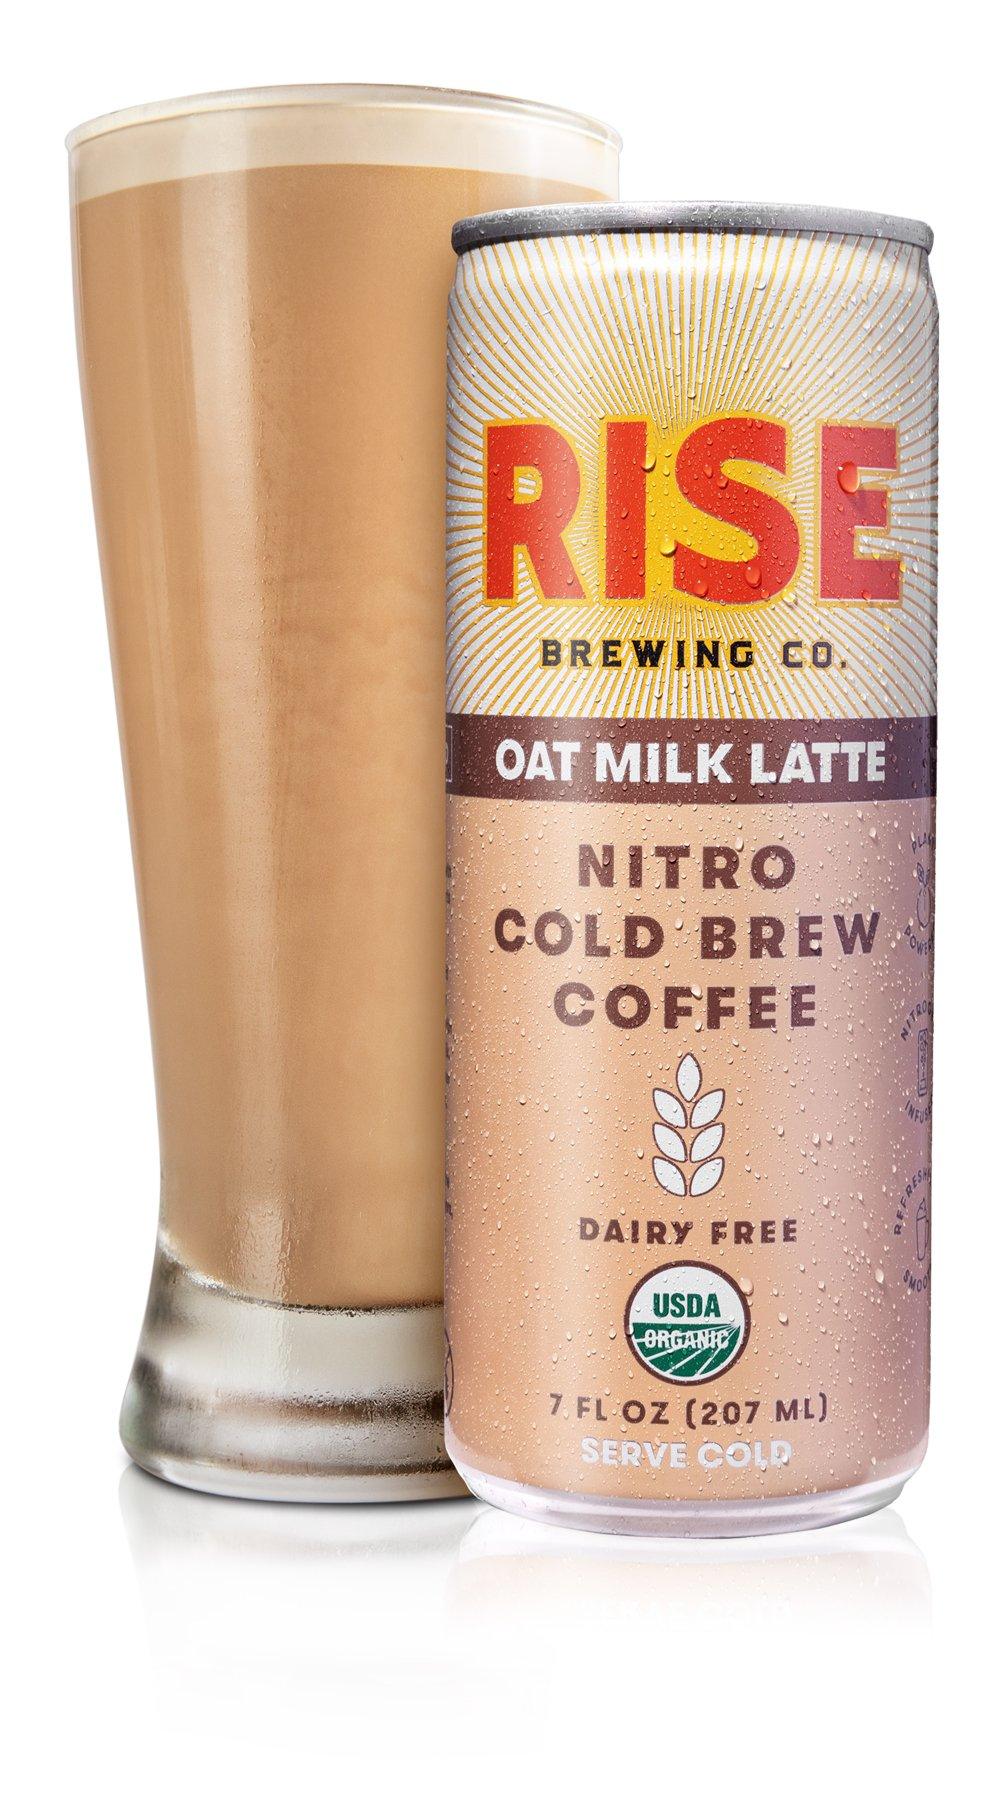 RISE Brewing Co. Nitro Cold Brew Coffee, Oat Milk Latte, 7 fl. oz. Cans (Pack of 12) - Oasis Snacks